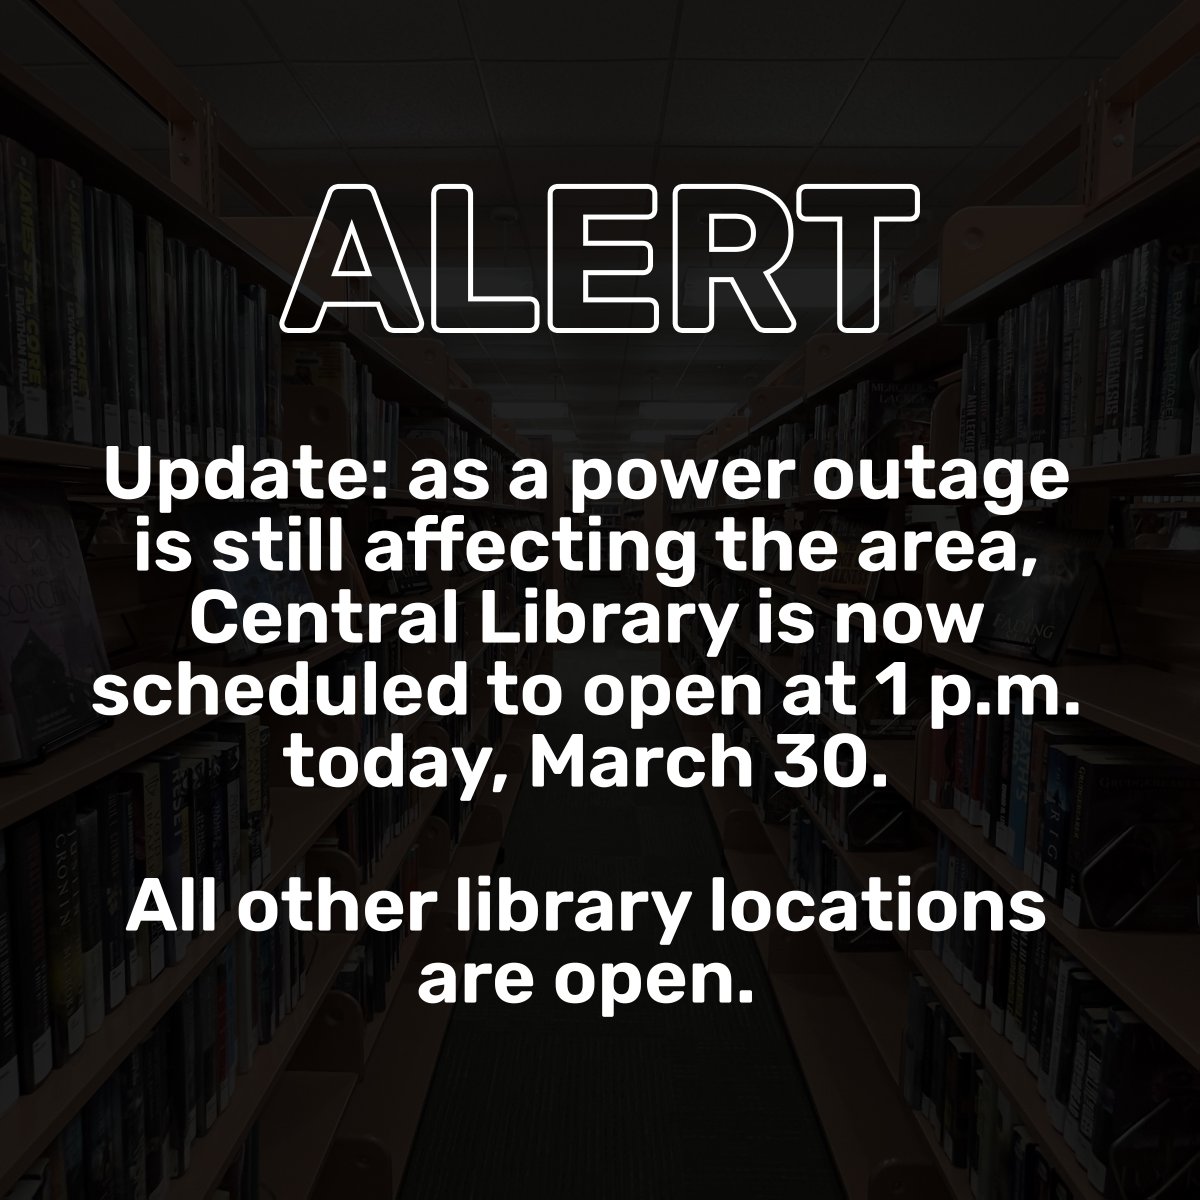 UPDATE: As a power outage is still affecting the area, Central Library is now scheduled to open at 1 p.m. today, March 30. Visit our website for the latest status updates. 🔗 library.arlingtonva.us